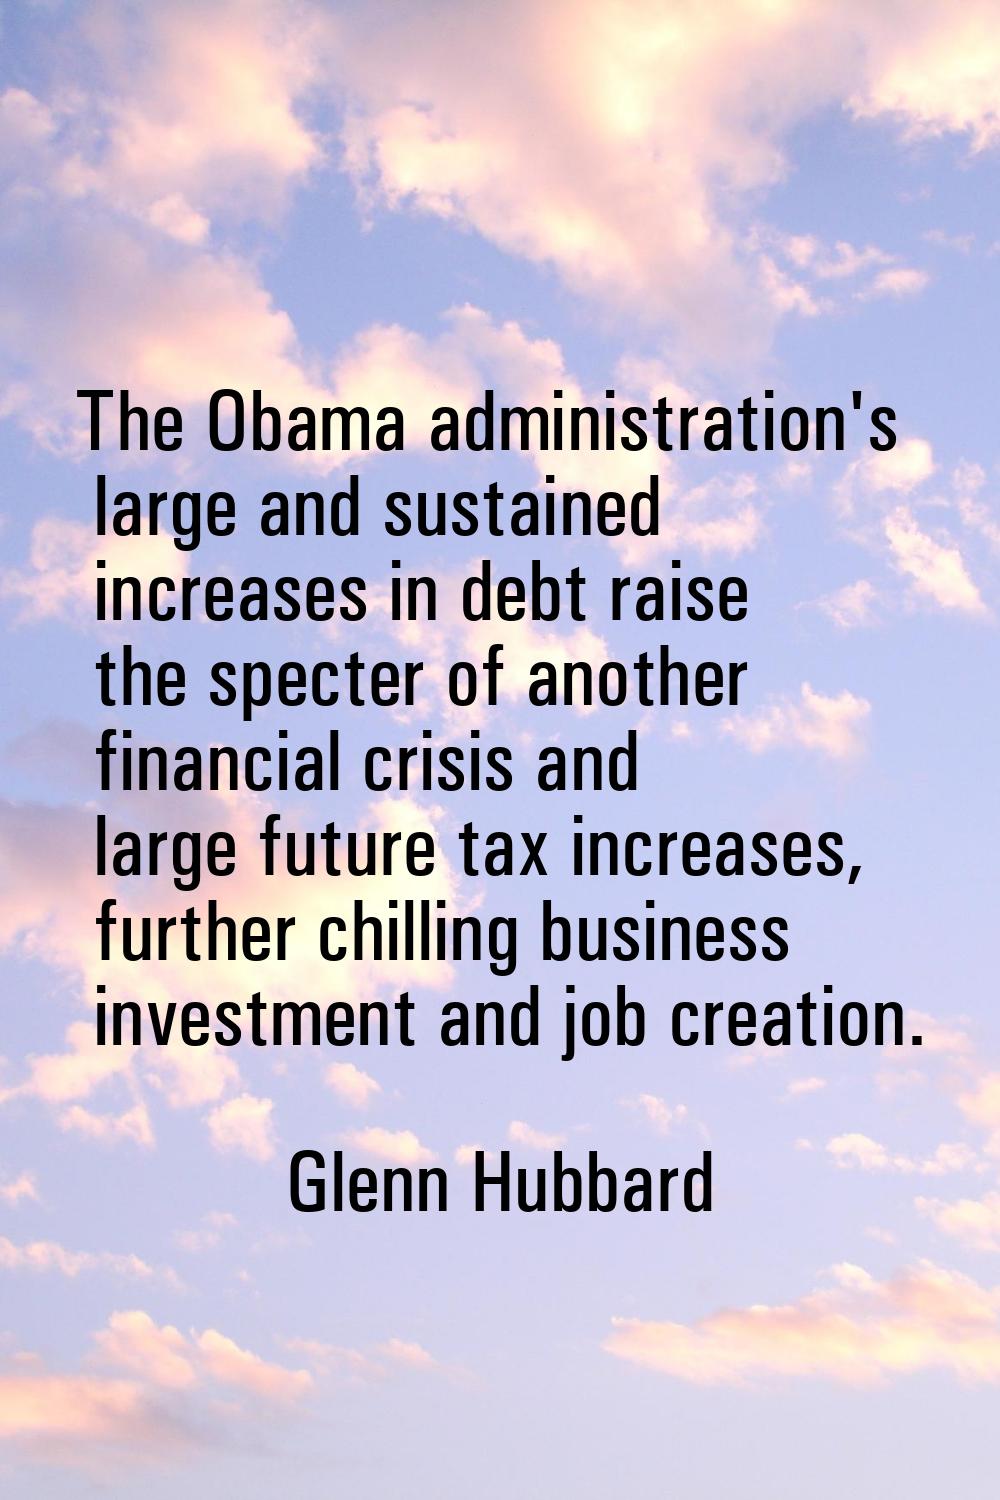 The Obama administration's large and sustained increases in debt raise the specter of another finan